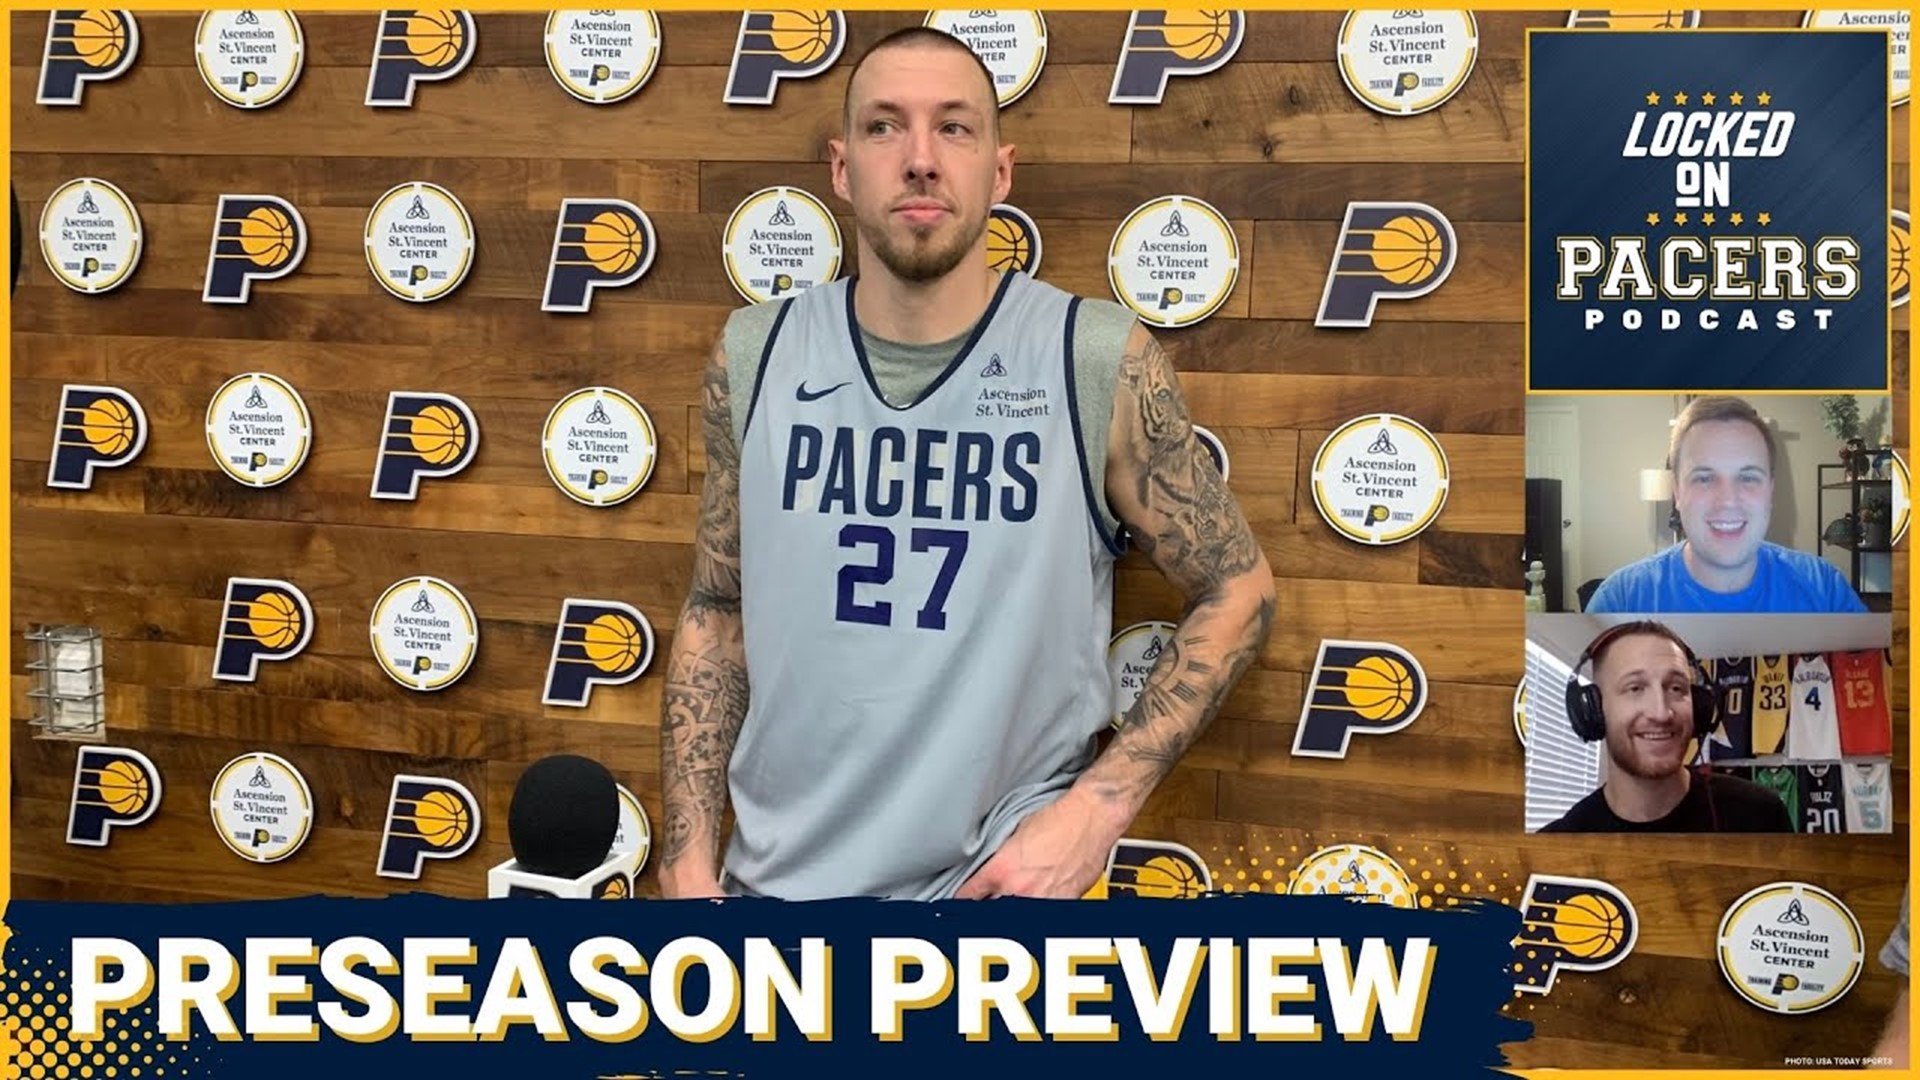 What to watch for in the Indiana Pacers preseason games